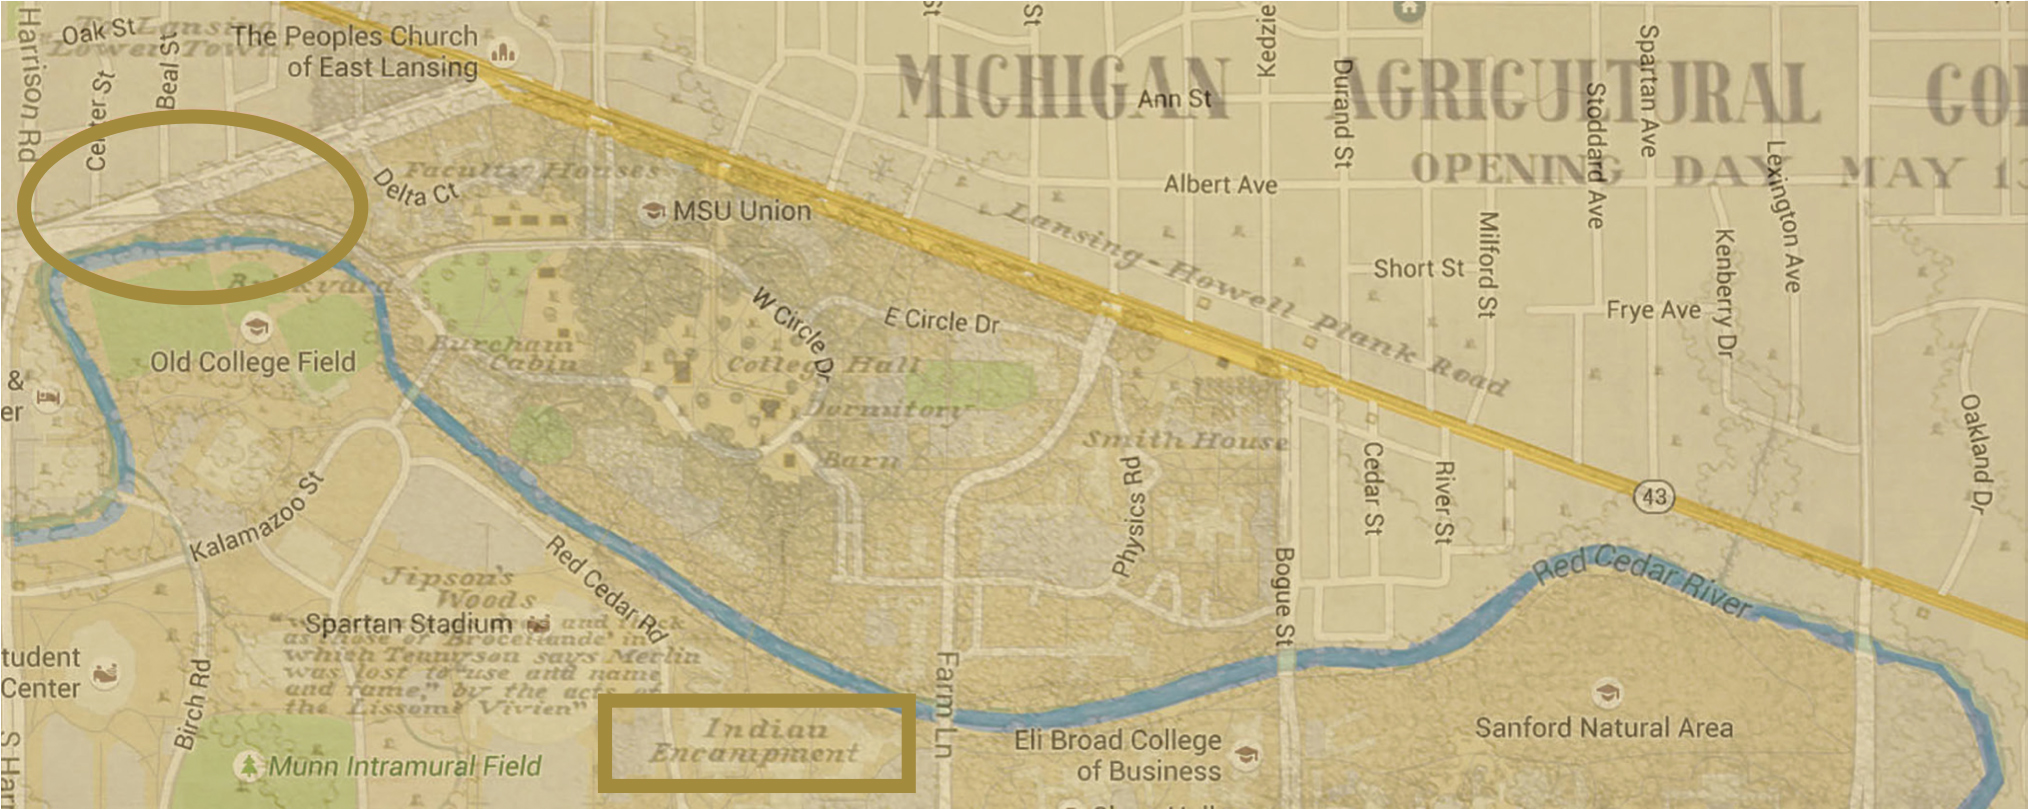 Michigan Agricultural College map representing campus in 1857 with a modern map of Michigan State University indicating the location of the Native encampment.